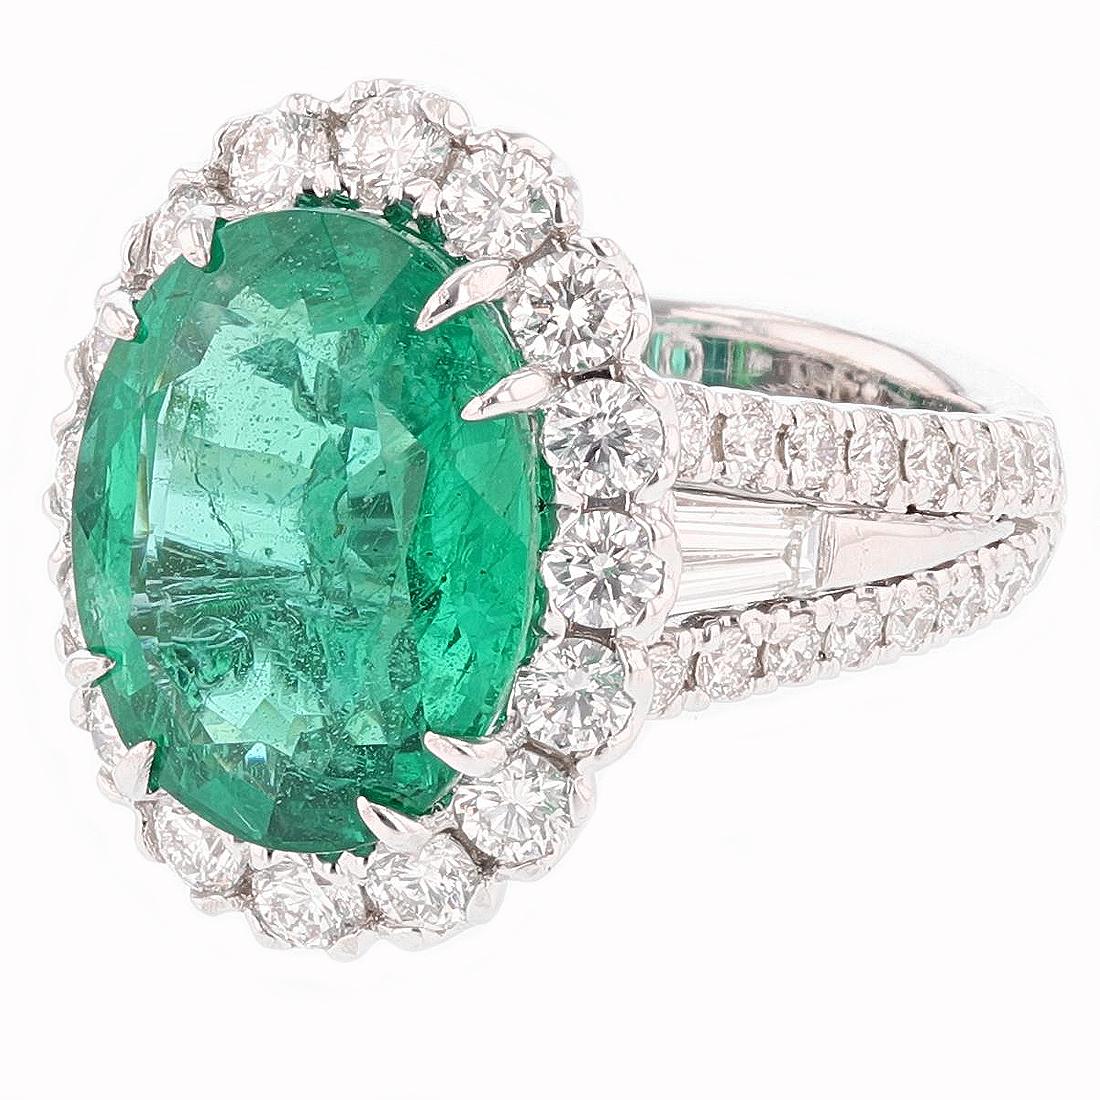 This ring is made in 14K white gold and features a 7.60ct Oval Cut Emerald center stone. The stone has a C.Dunaigre certificate with # CDC 1801820. The mounting features 50 round cut diamonds prong set weighing 2.07ct Color Grade (G) Clarity Grade